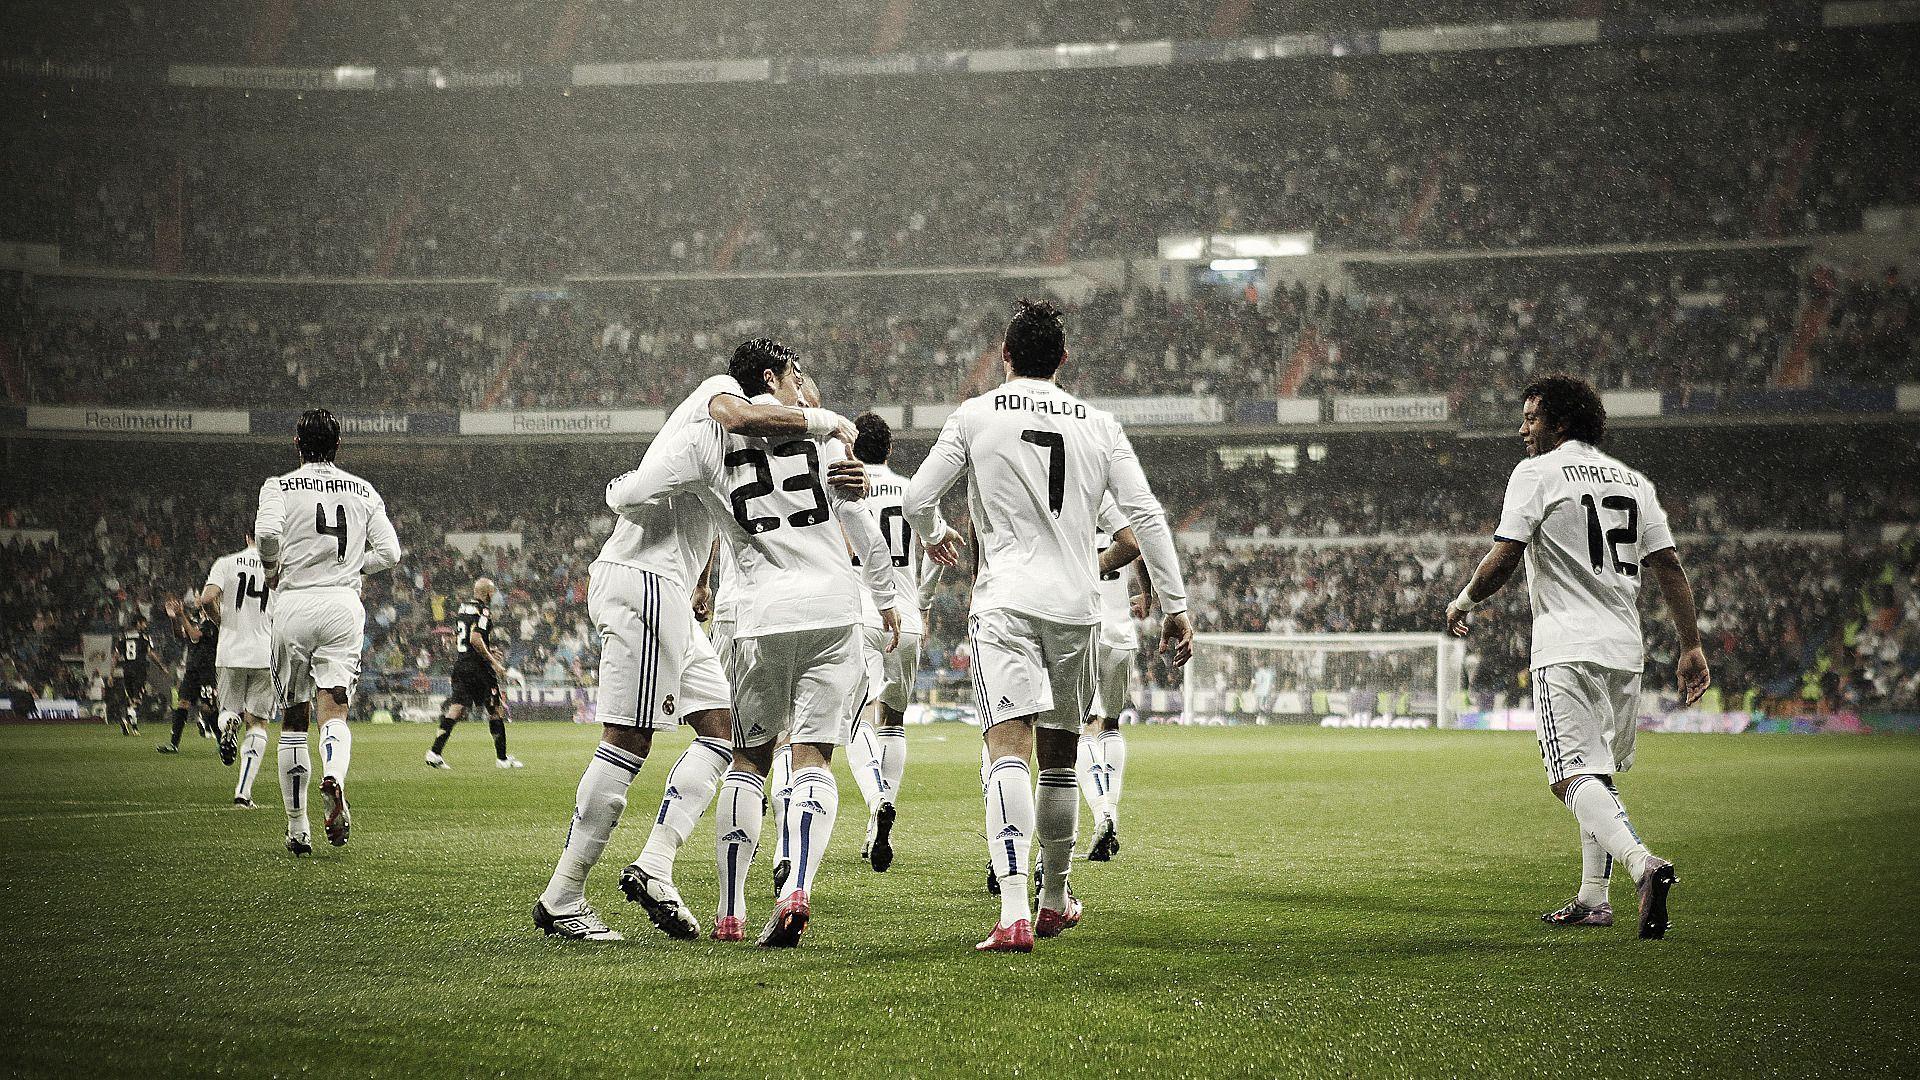 FC Real Madrid Wallpaper Image Photo Picture Background